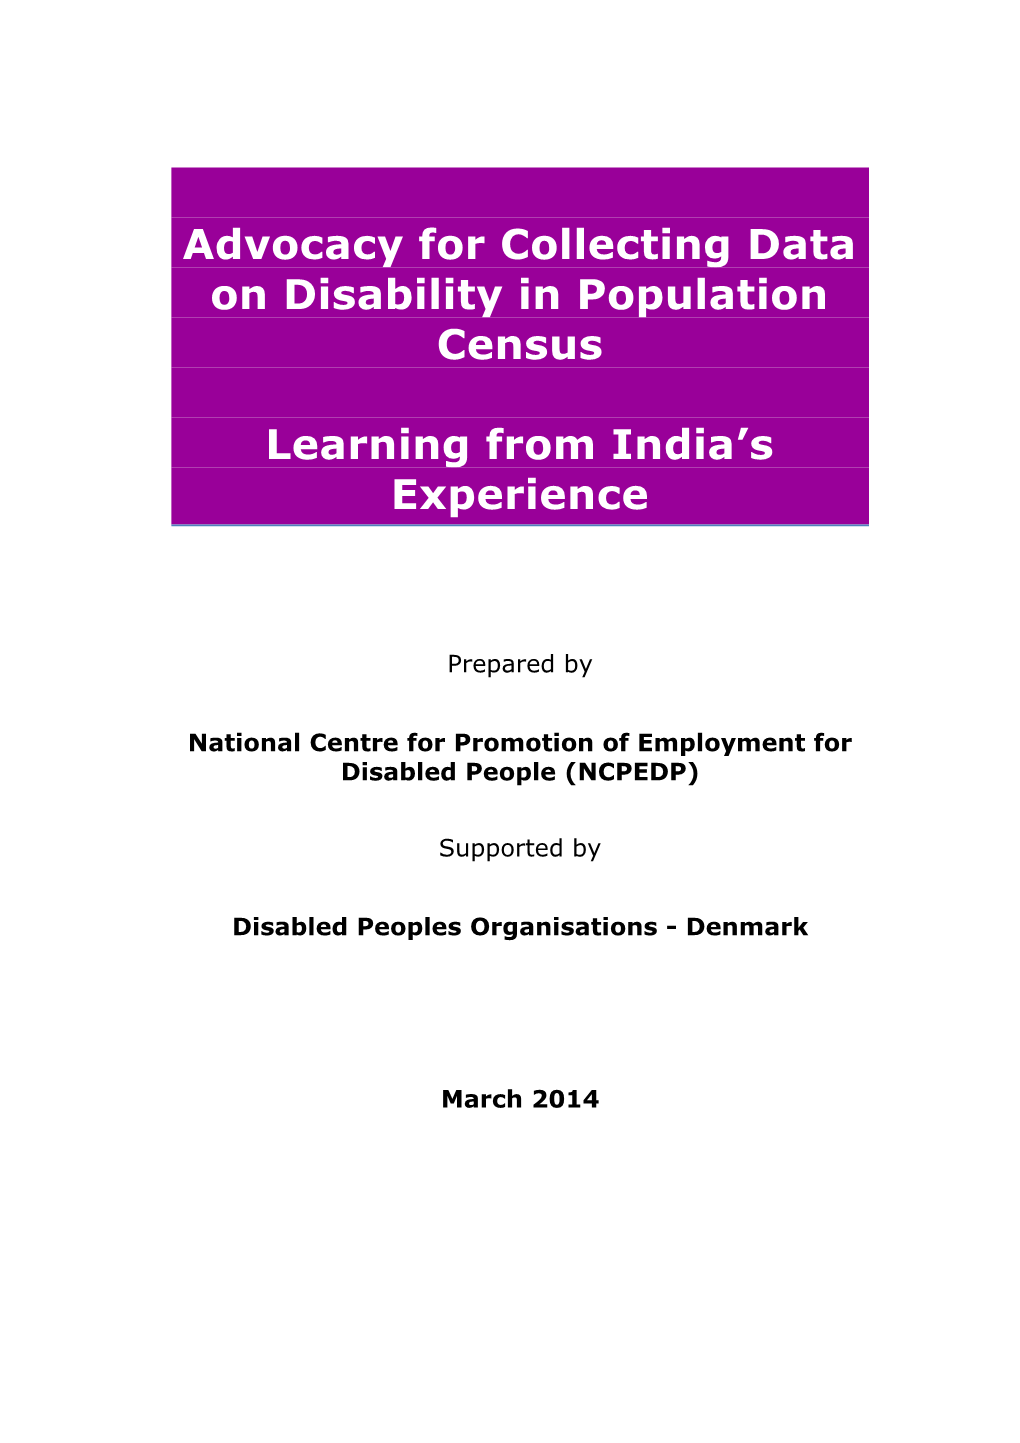 Advocacy for Collecting Data on Disability in Population Census